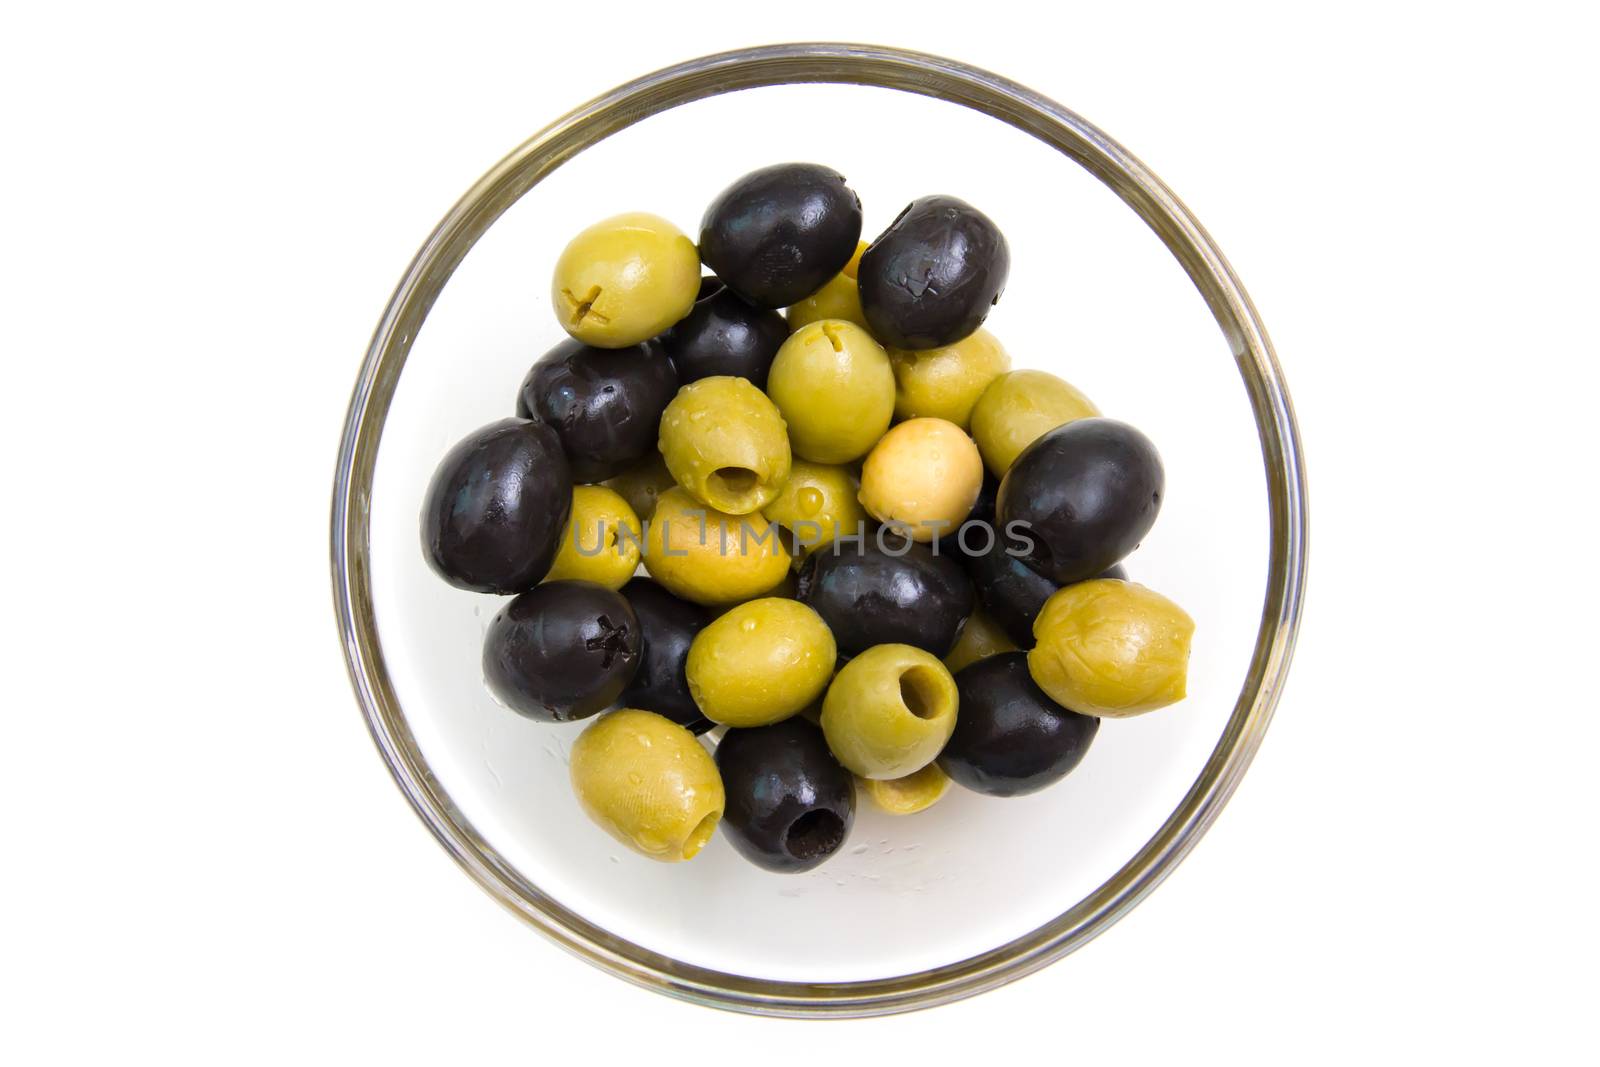 Green and black olives from by spafra